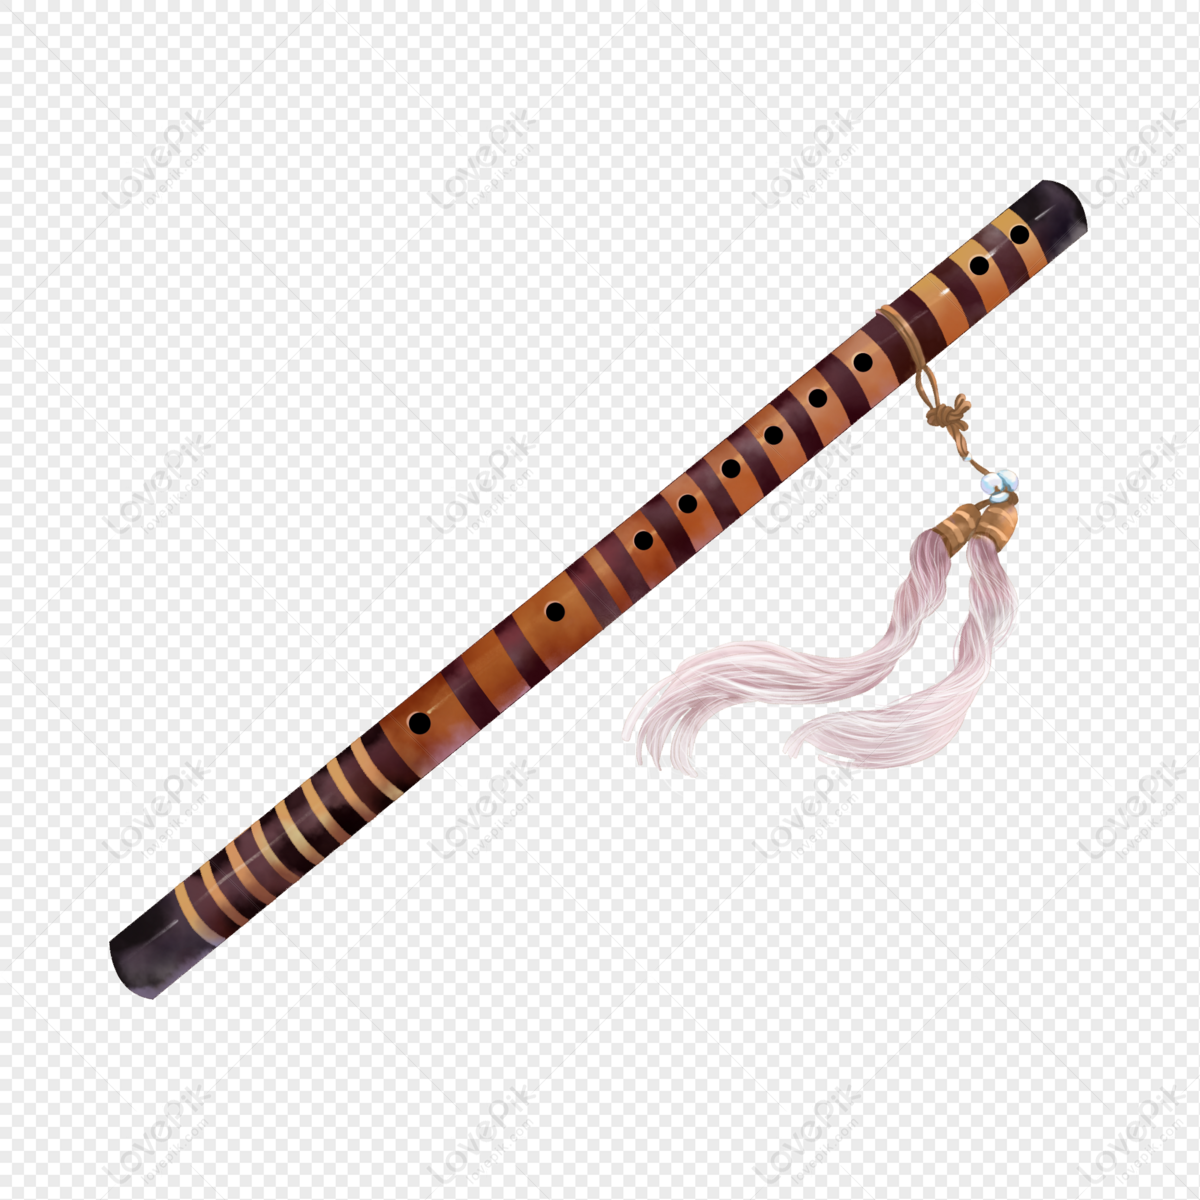 Bamboo Flute PNG Hd Transparent Image And Clipart Image For Free Download -  Lovepik | 401494764